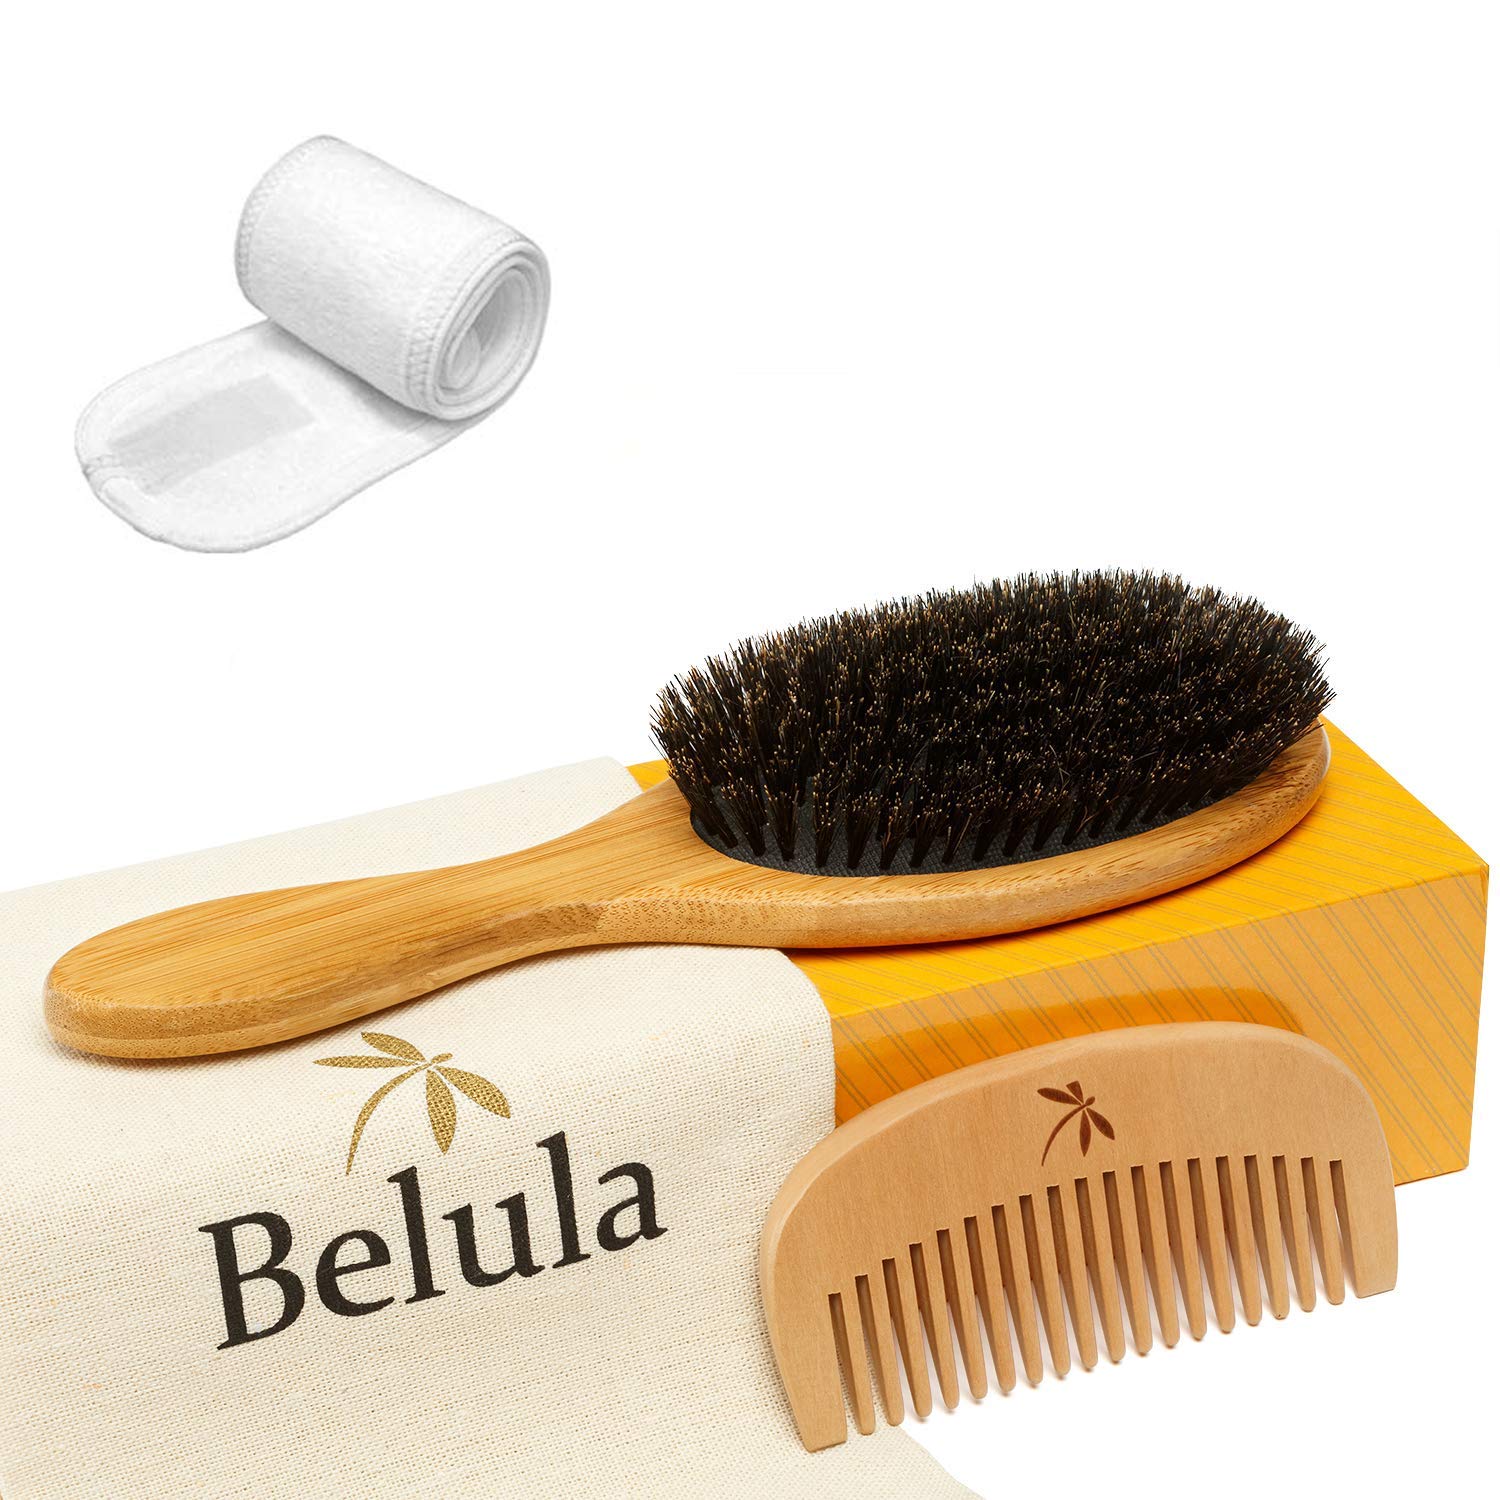 Belula 100% Boar Bristle Hair Brush Set. Soft Natural Bristles for Thin and  Fine Hair. Restore Shine And Texture. Wooden Comb, Travel Bag and Spa